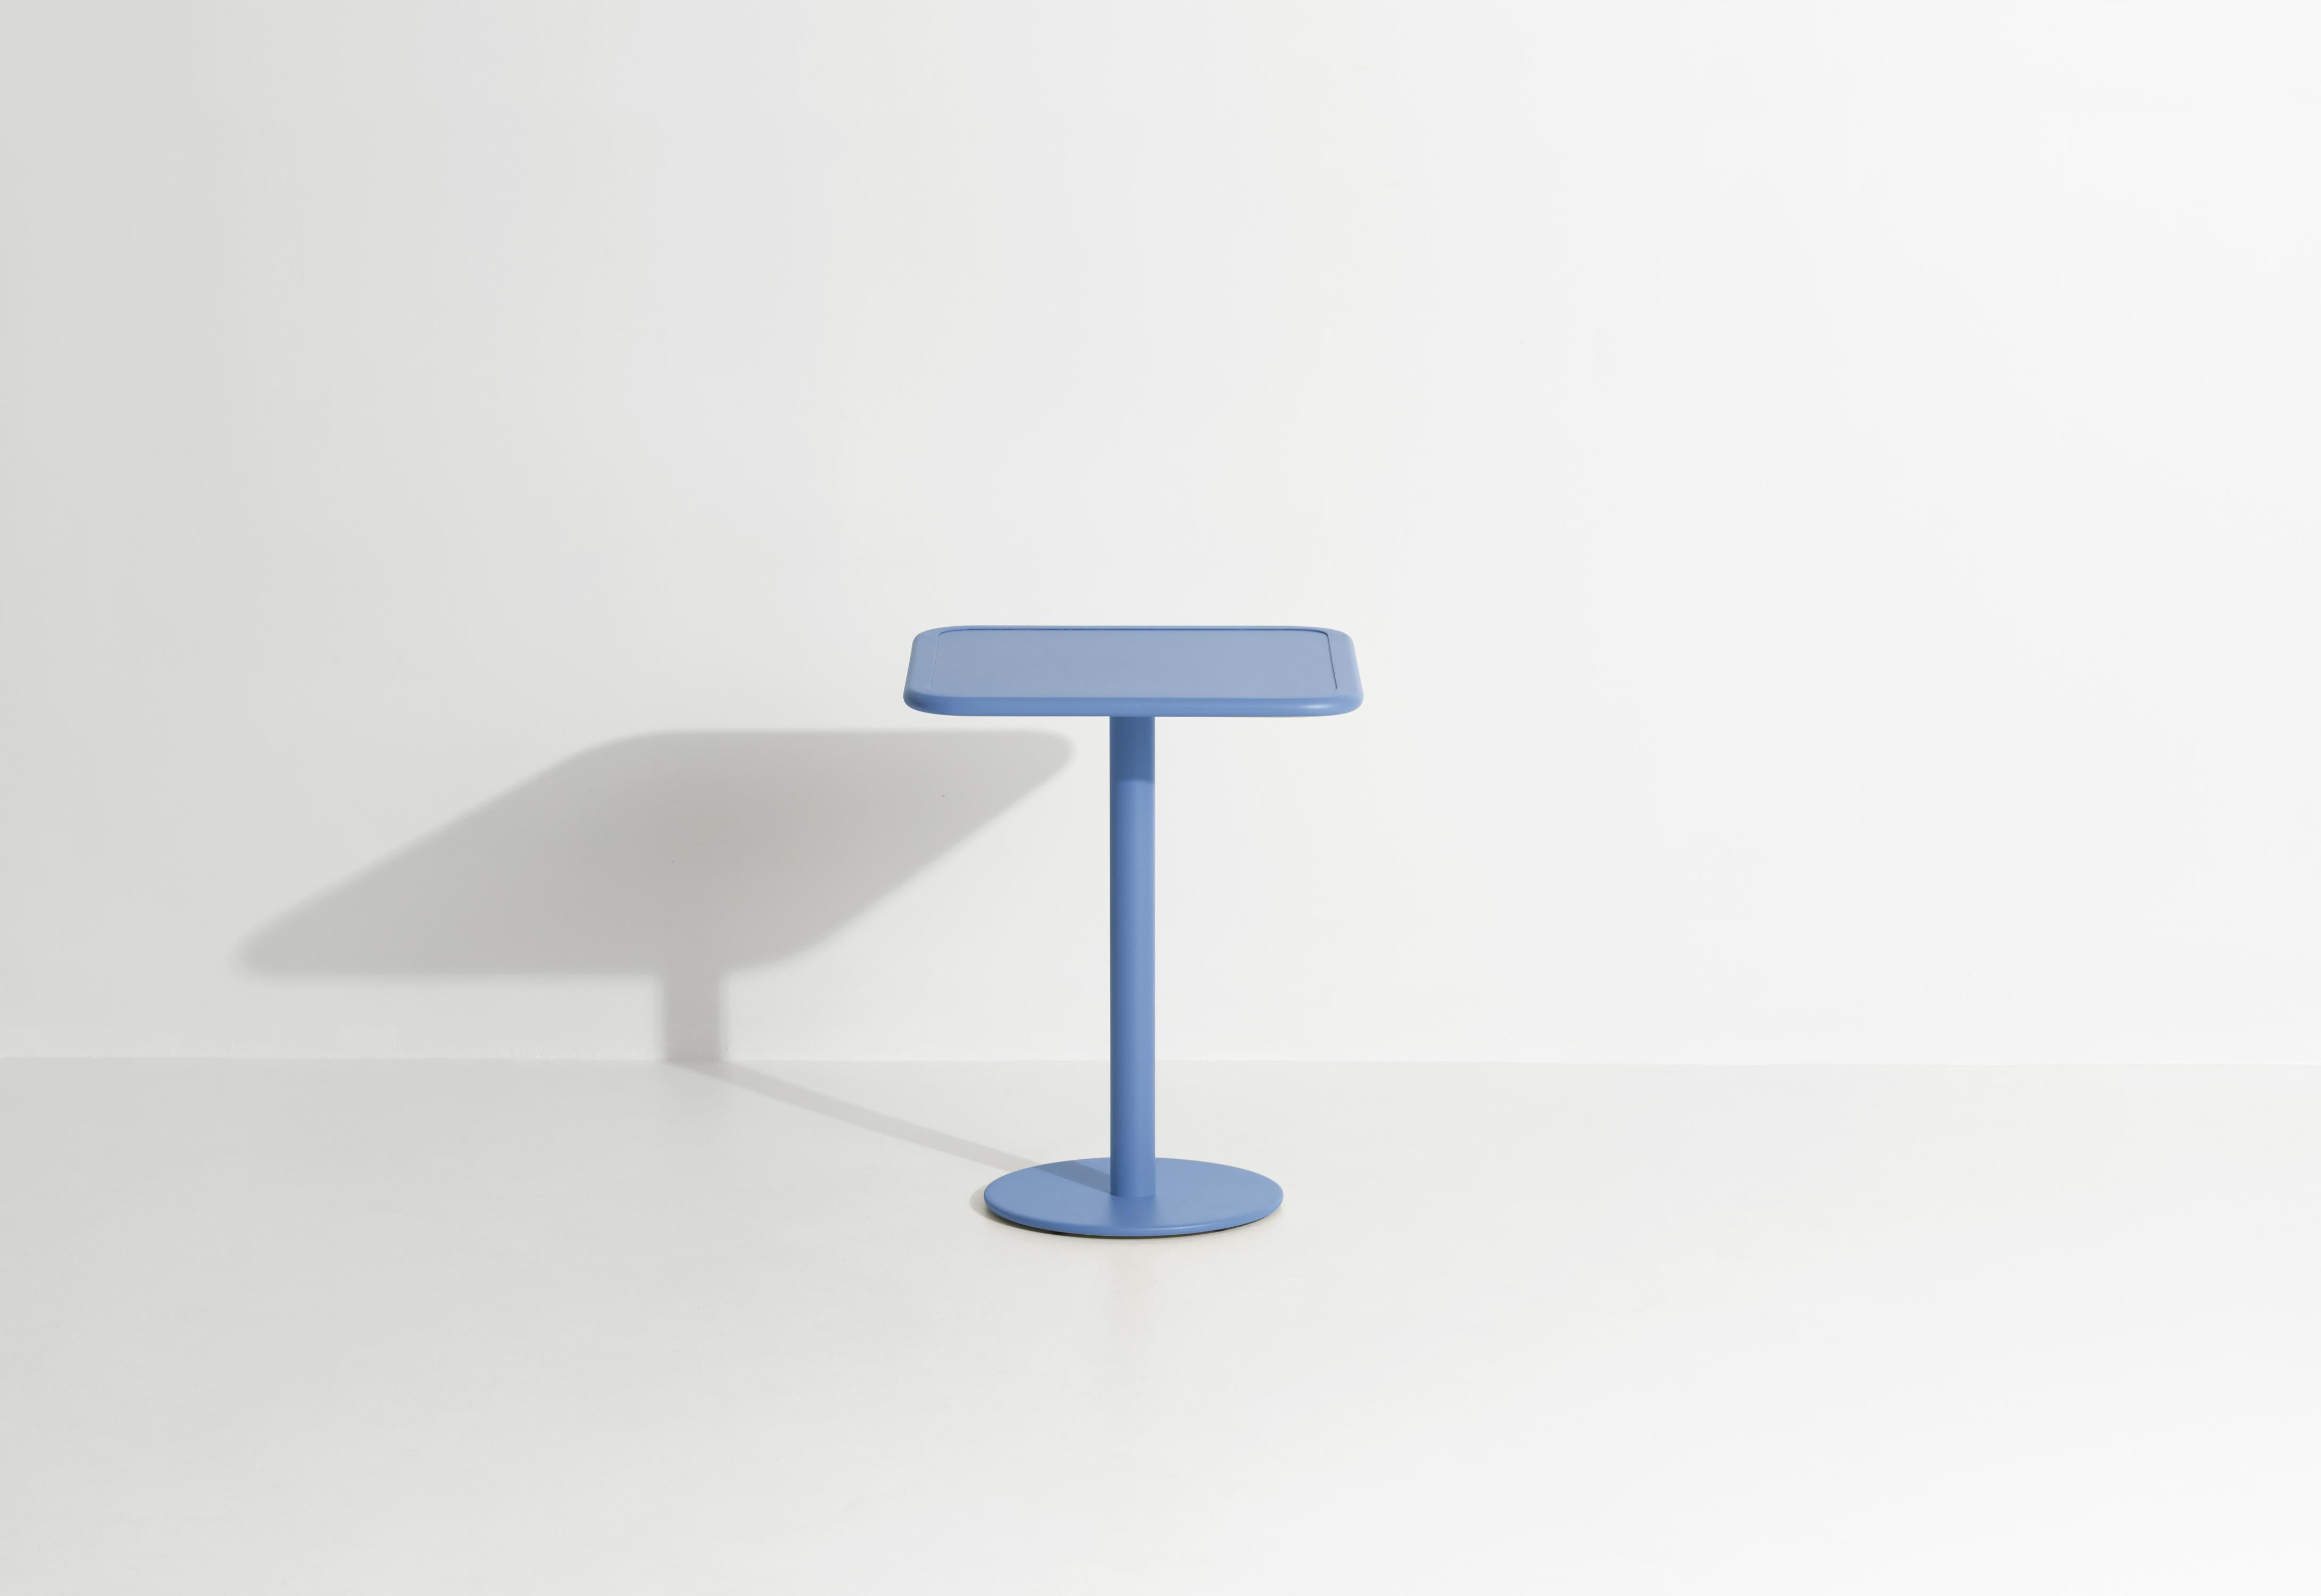 Petite Friture Week-End Bistro Square Dining Table in Azure Blue Aluminium by Studio BrichetZiegler, 2017

The week-end collection is a full range of outdoor furniture, in aluminium grained epoxy paint, matt finish, that includes 18 functions and